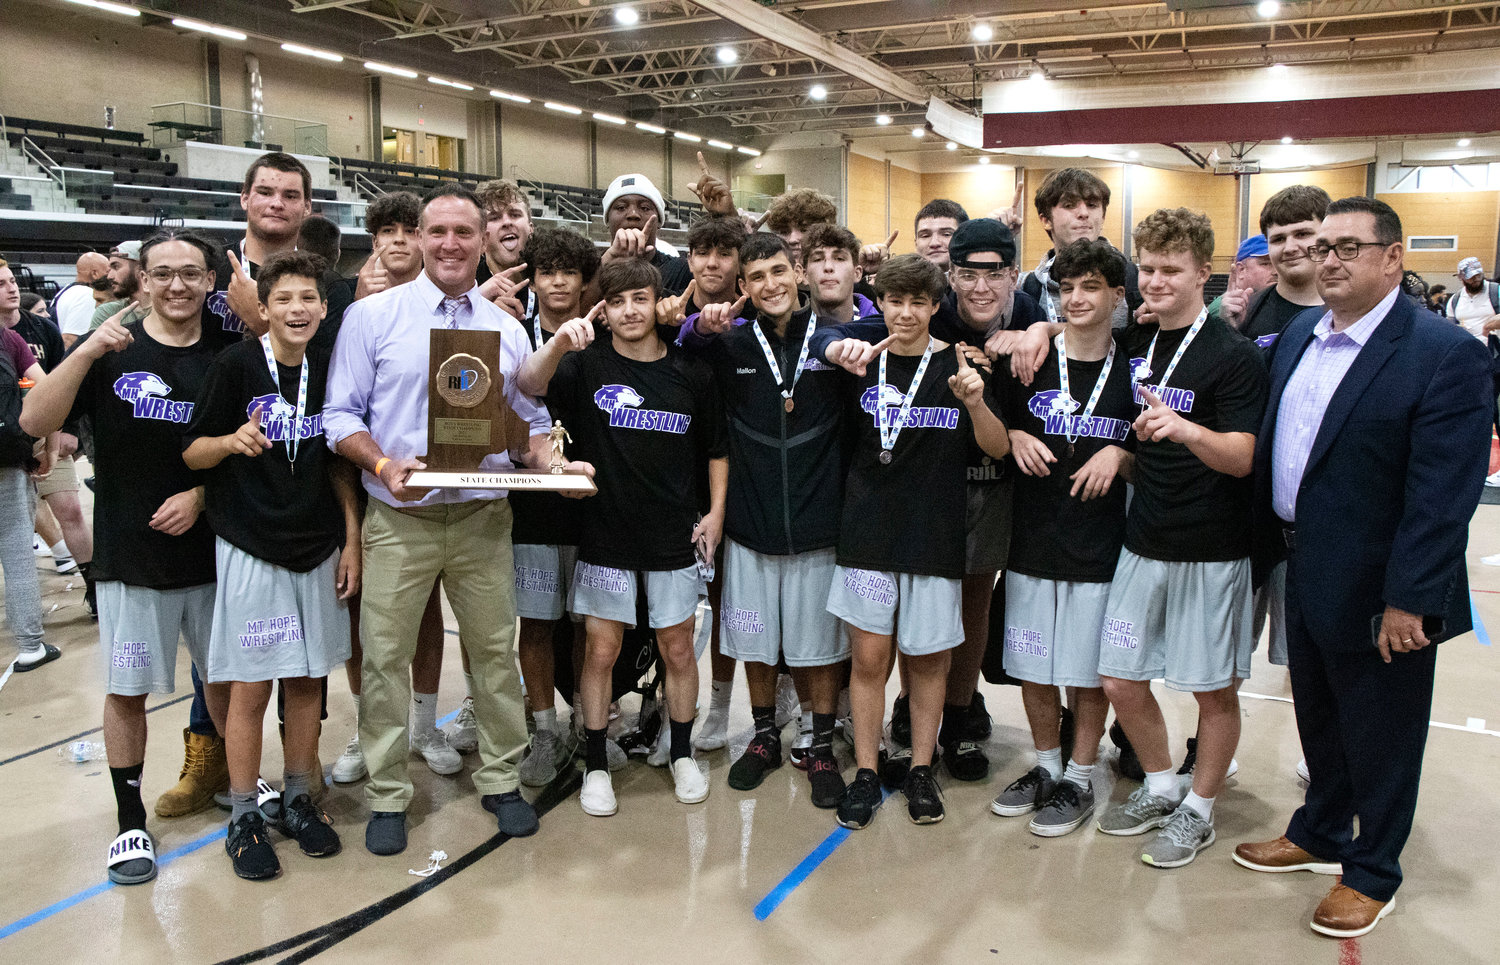 Head coach Eric Francis (mid-left) and assistant coach Mike Perreira (right) pose the the team and the state championship trophy after the meet.